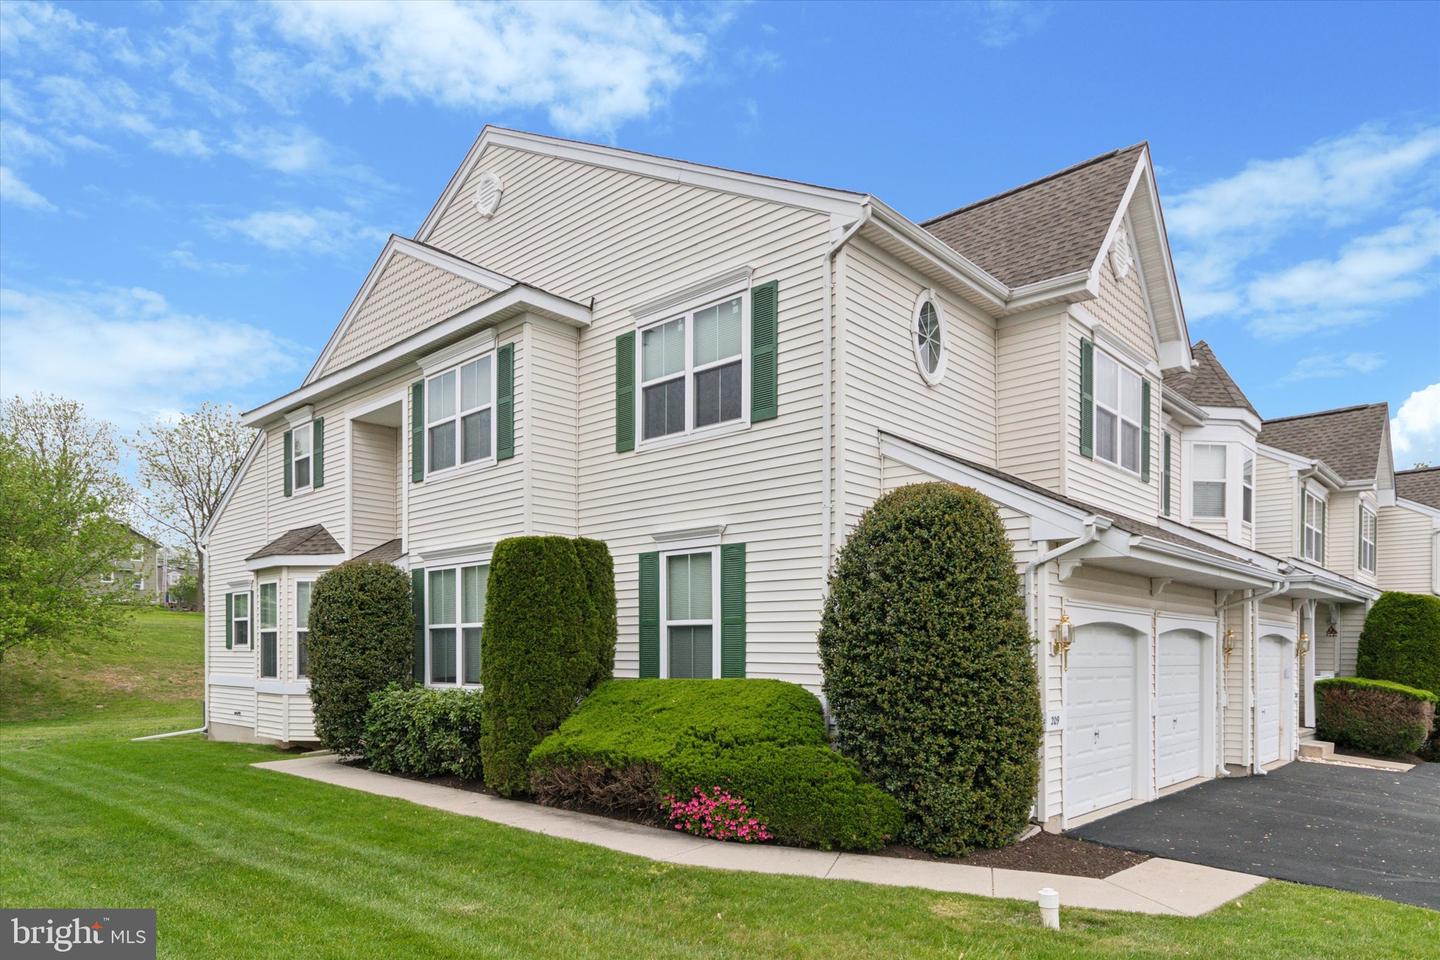 View Chalfont, PA 18914 townhome